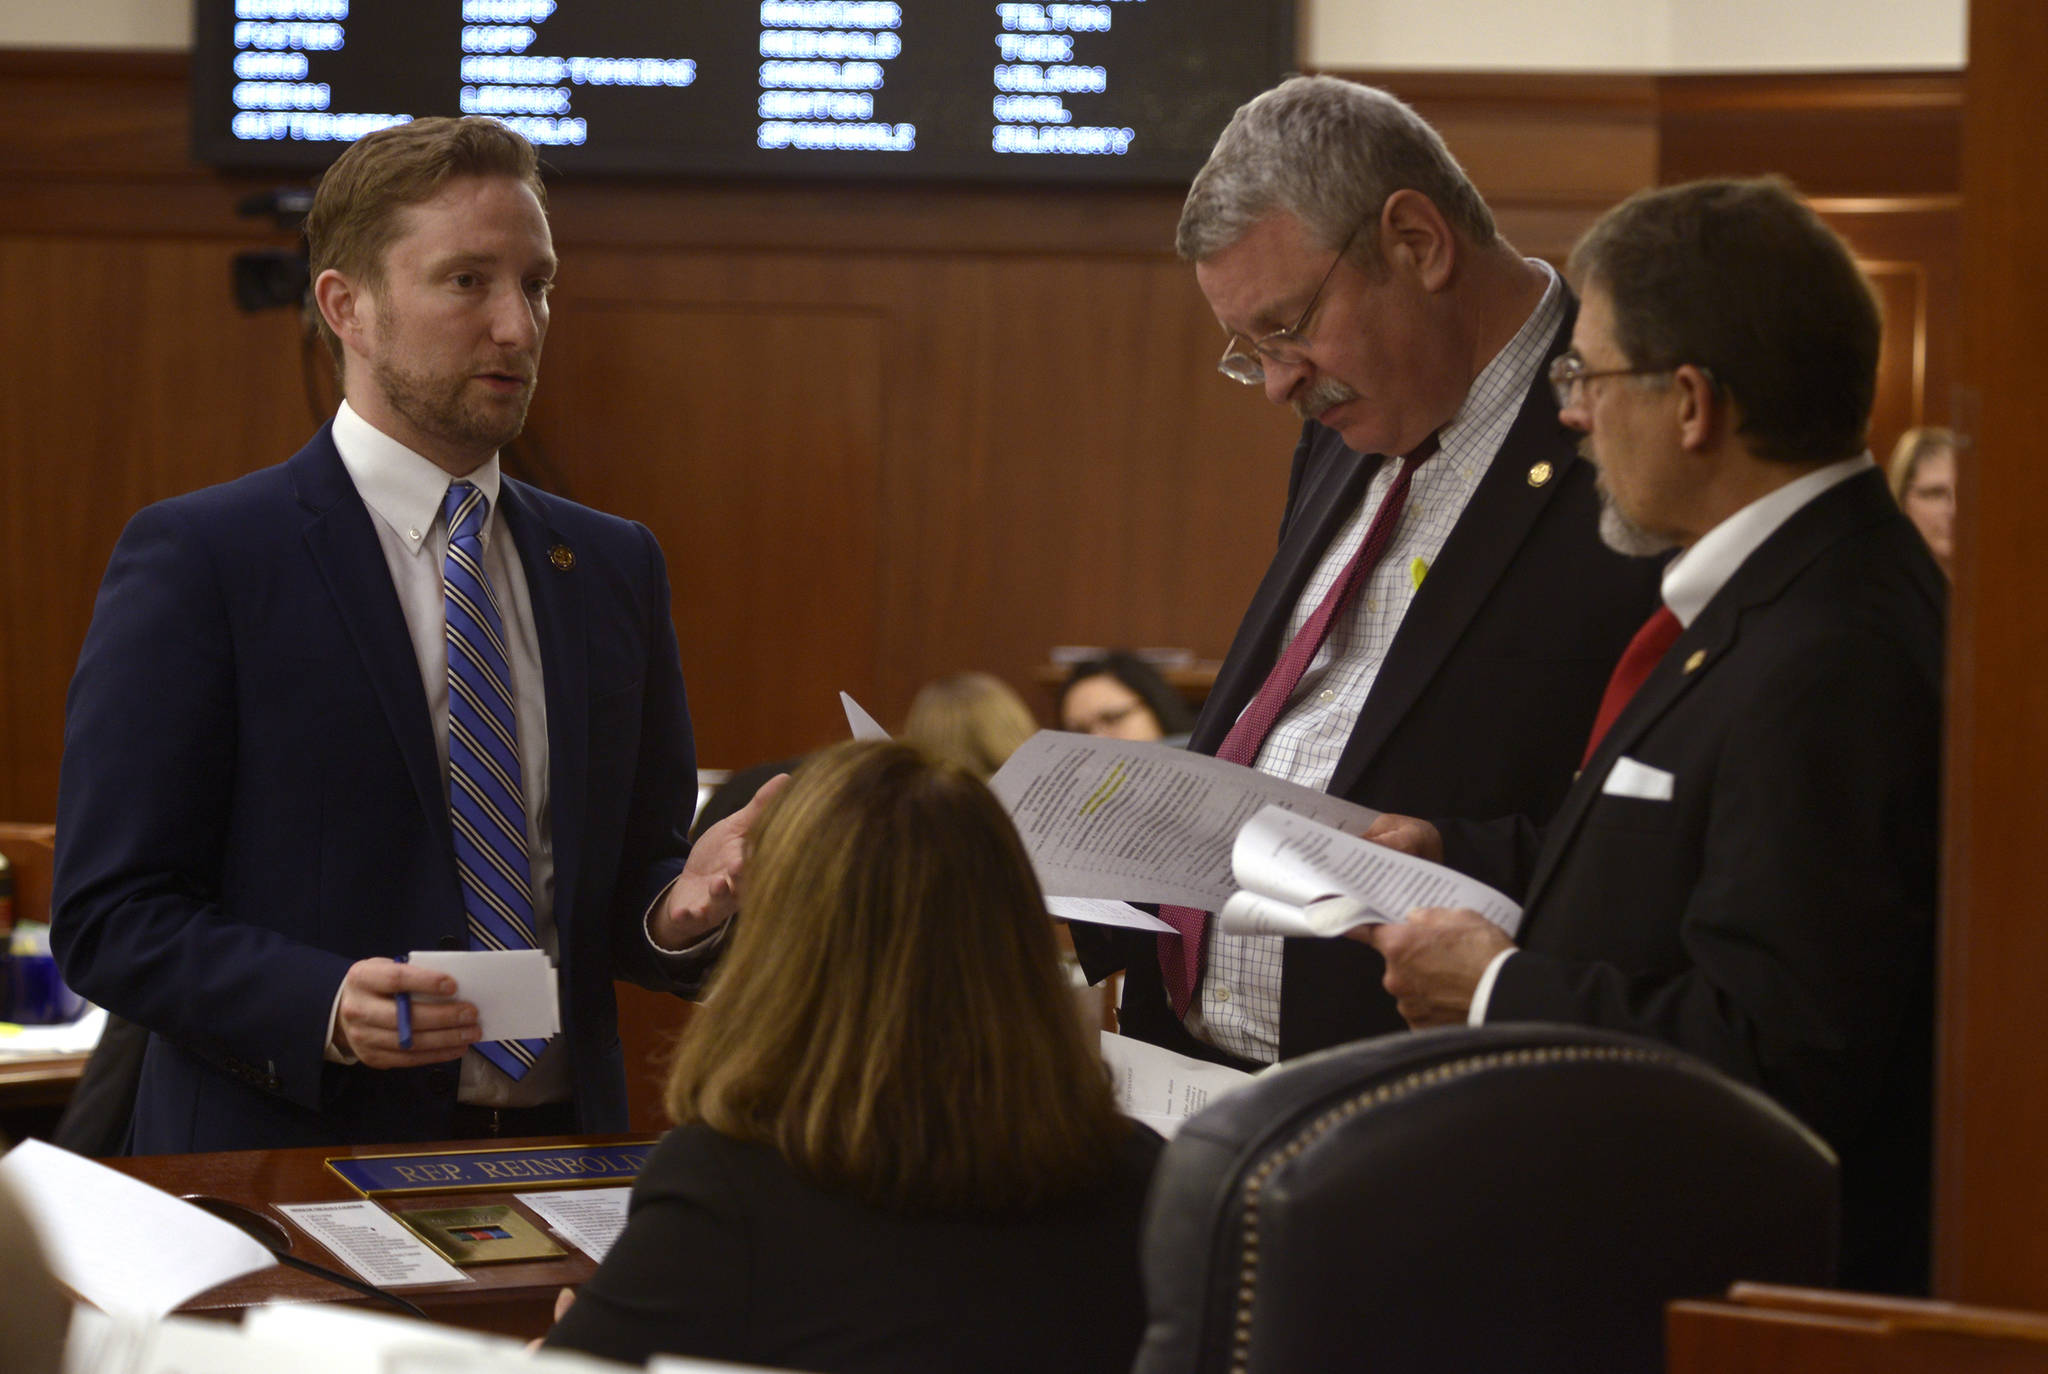 Rep. Jason Grenn, I-Anchorage (left) speaks to Rep. Dan Saddler, R-Eagle River (standing center), Rep. George Rauscher, R-Sutton (standing right) and Rep. Lora Reinbold, R-Eagle River (seated) before the final vote Friday, May 11, 2018 on House Bill 44. (Brian Hild | Alaska House Majority)